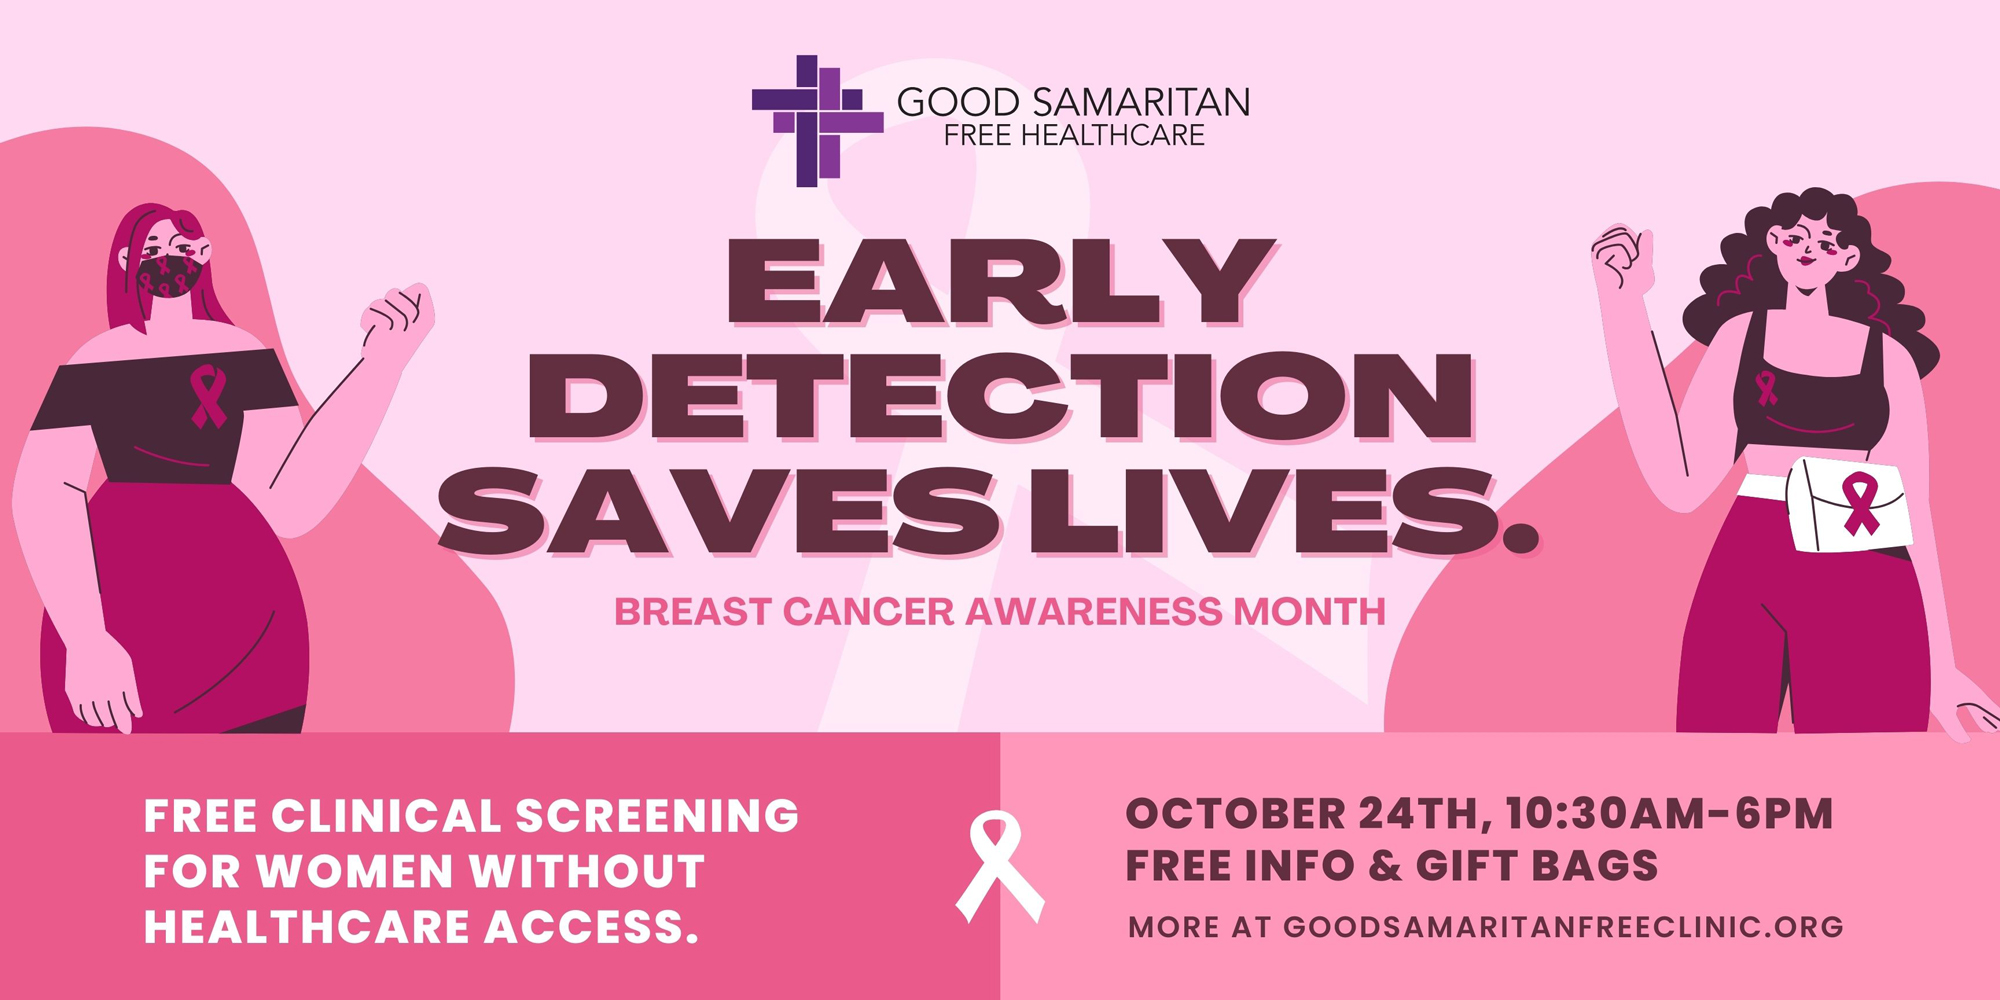 Breast Cancer Awareness Month. Early Detection Saves Lives. Free clinical screening for women without healthcare access. October 24th, 10:30AM-6pm Free Info & Gift Bags